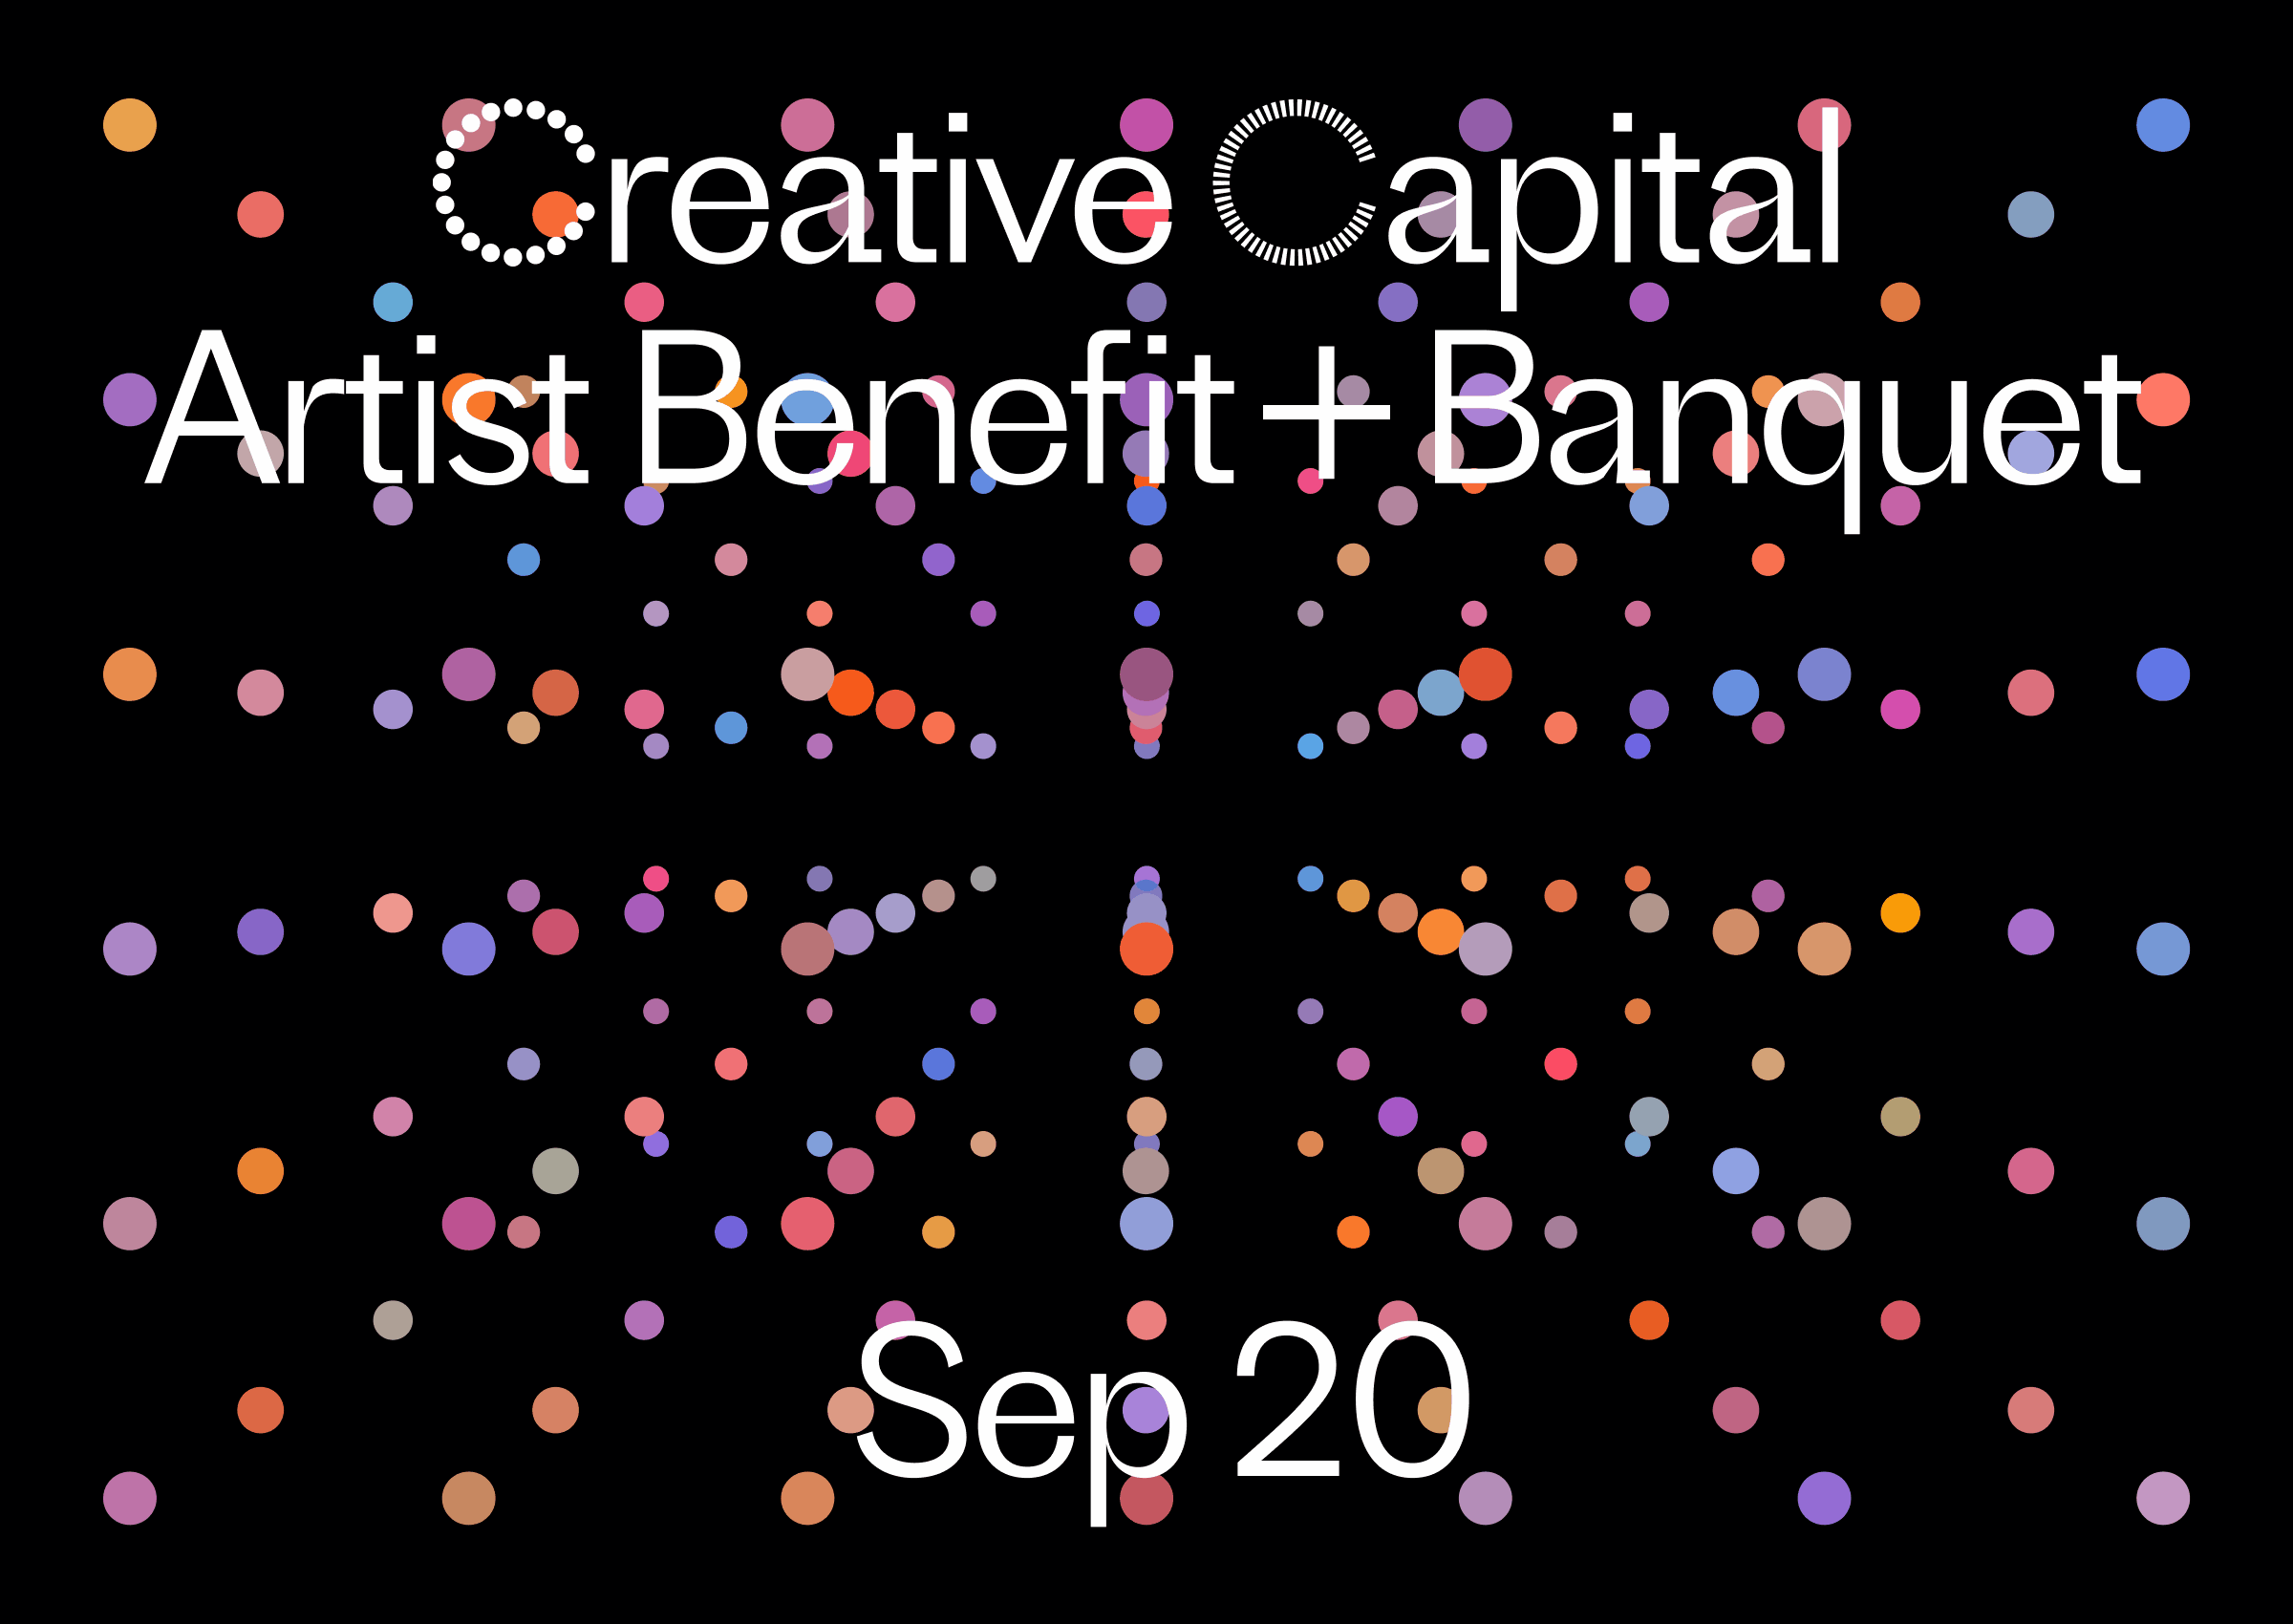 A GIF with colorful dots on a black background reads "Creative Capital Artist Benefit + Banquet Sep 20"